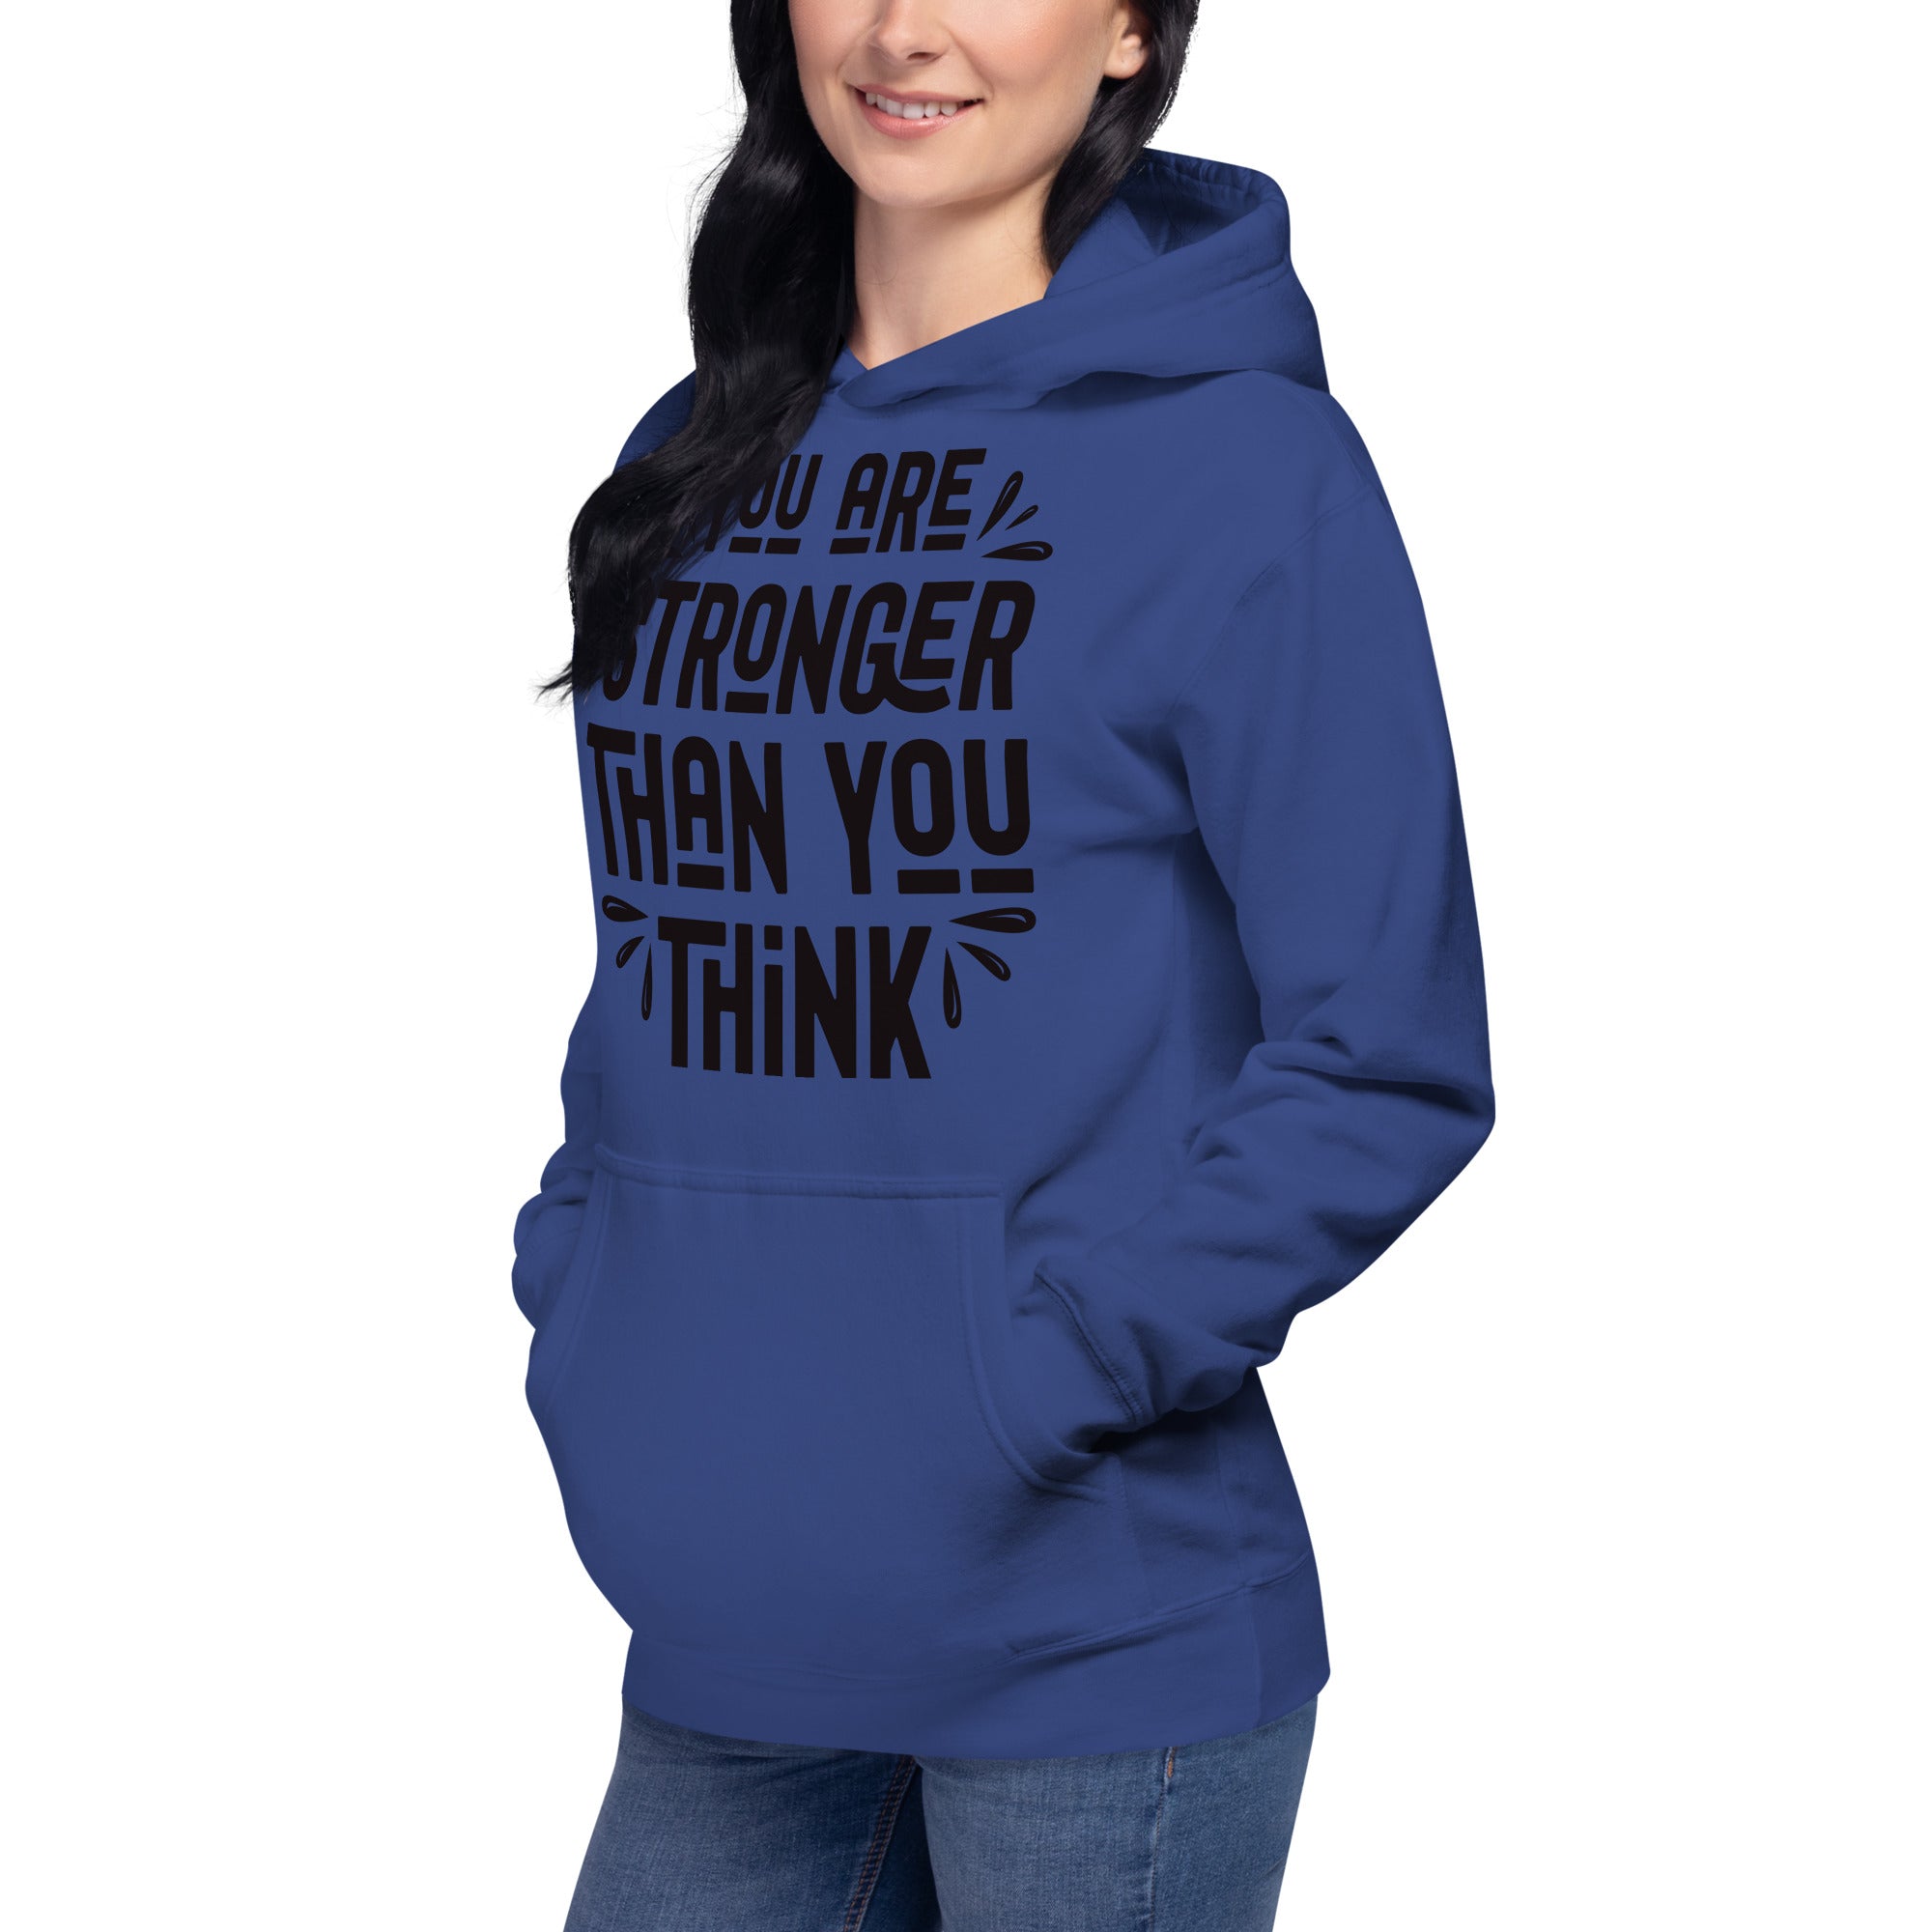 Unisex Hoodie, (Stronger then you think) Back to School, Gift, Travel